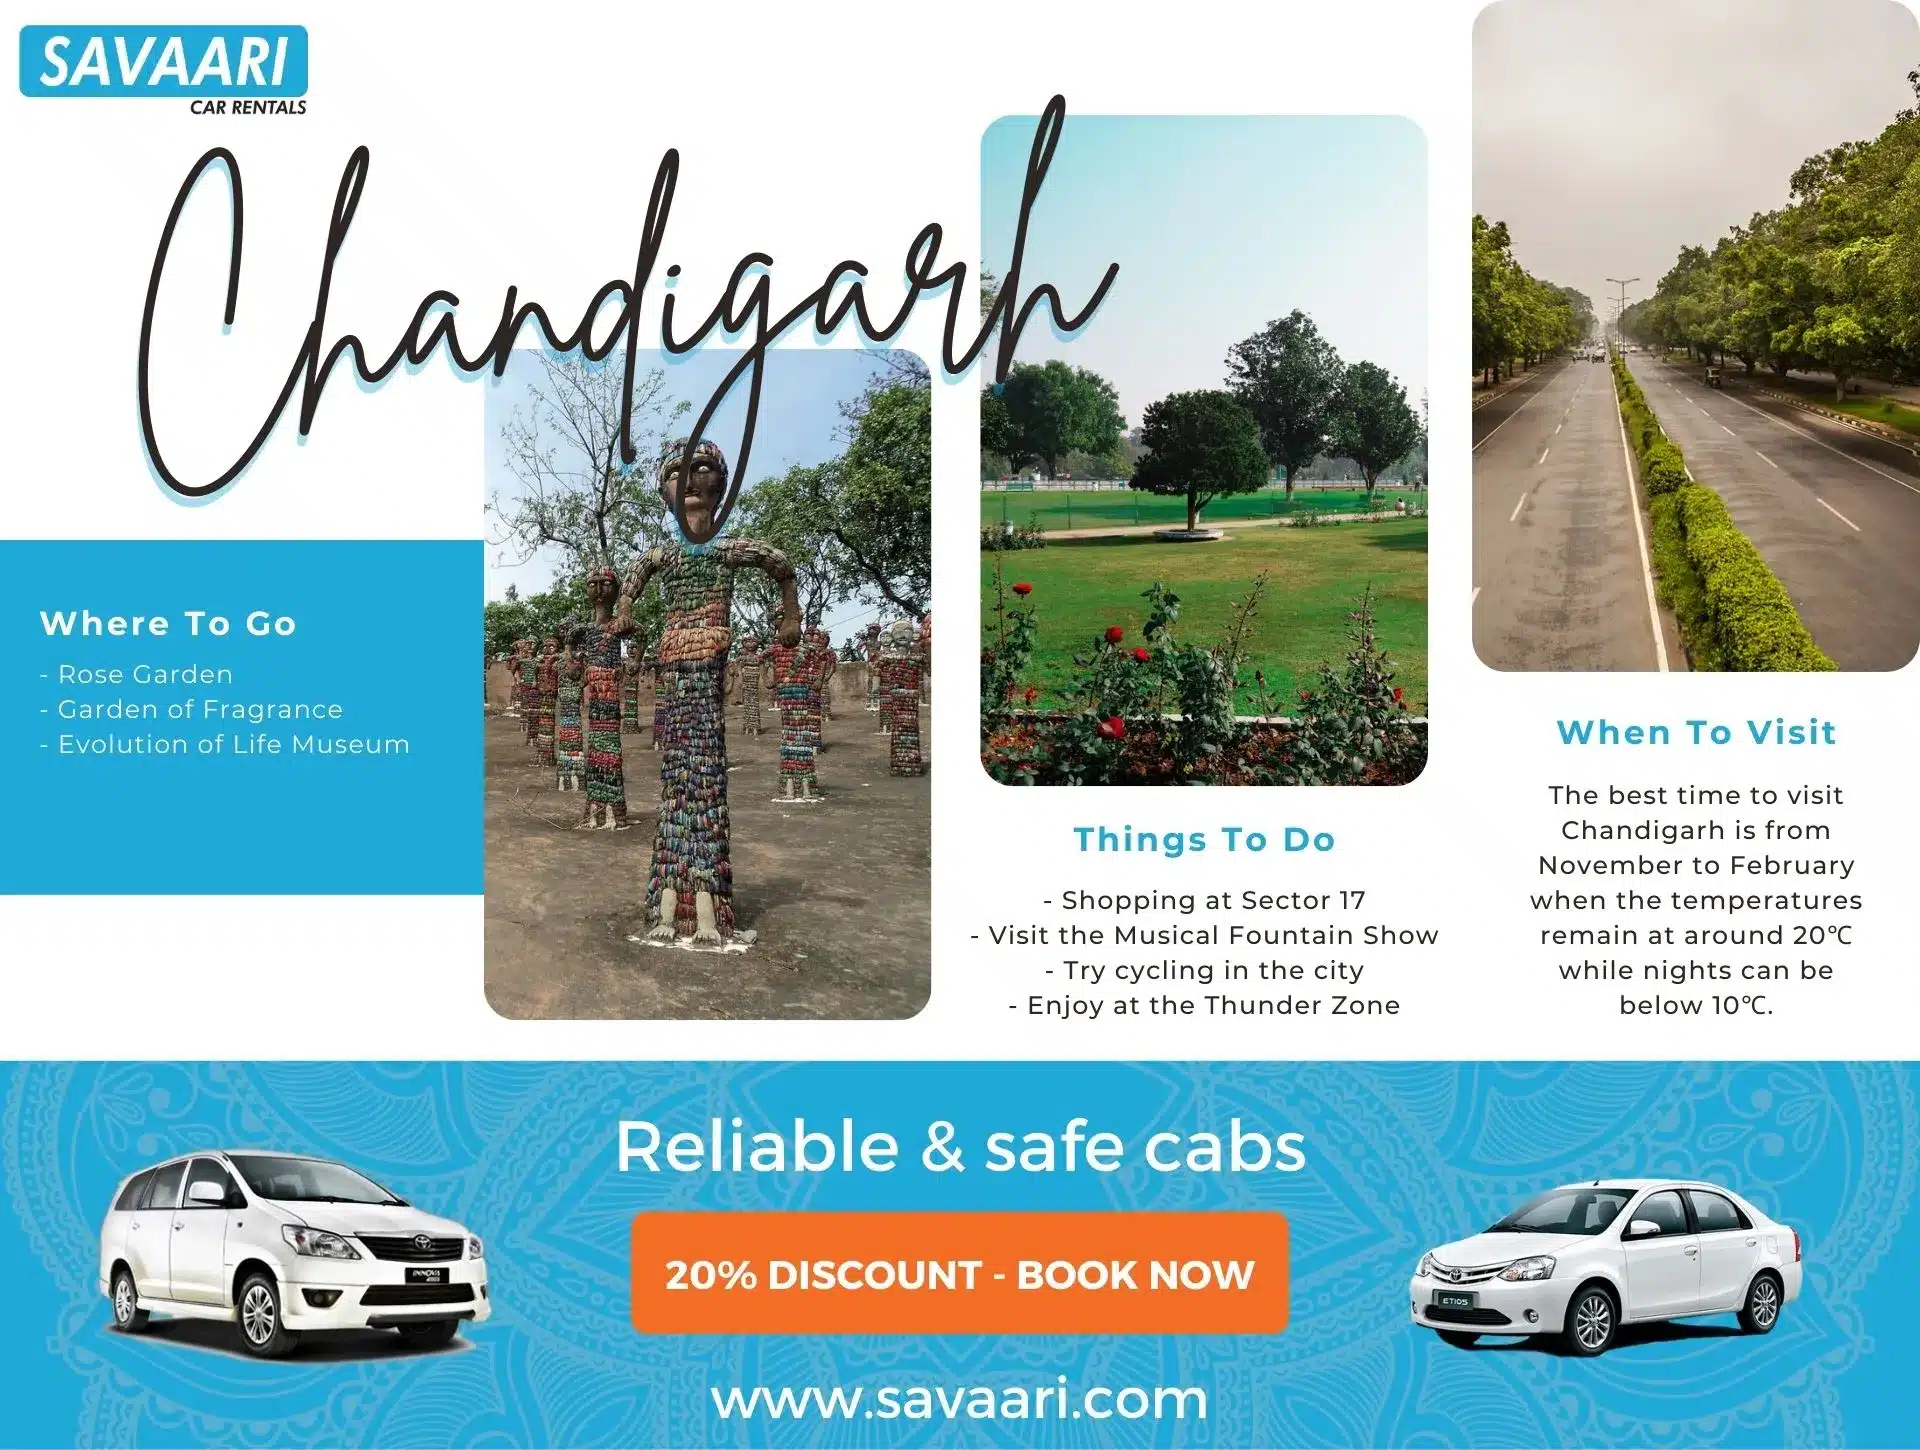  things to do in Chandigarh